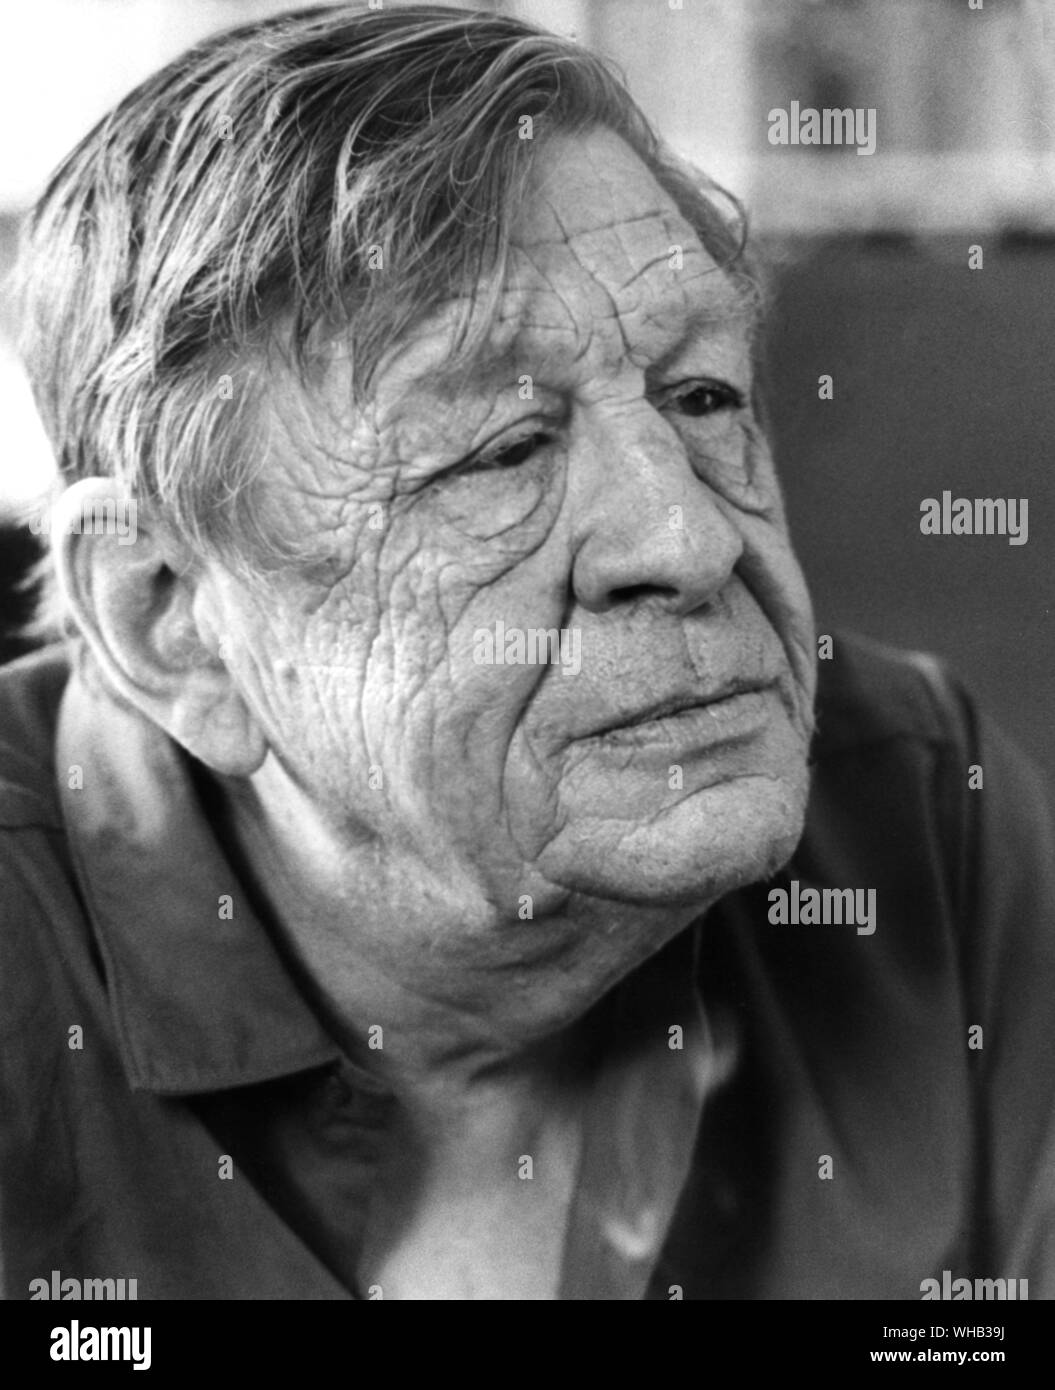 W H Auden. Wystan Hugh Auden (1907-1973) was an English poet and critic, widely regarded as among the most influential and important writers of the 20th century. He spent the first part of his life in the United Kingdom, but emigrated to the United States in 1939, becoming a U.S. citizen in 1946.. . Stock Photo